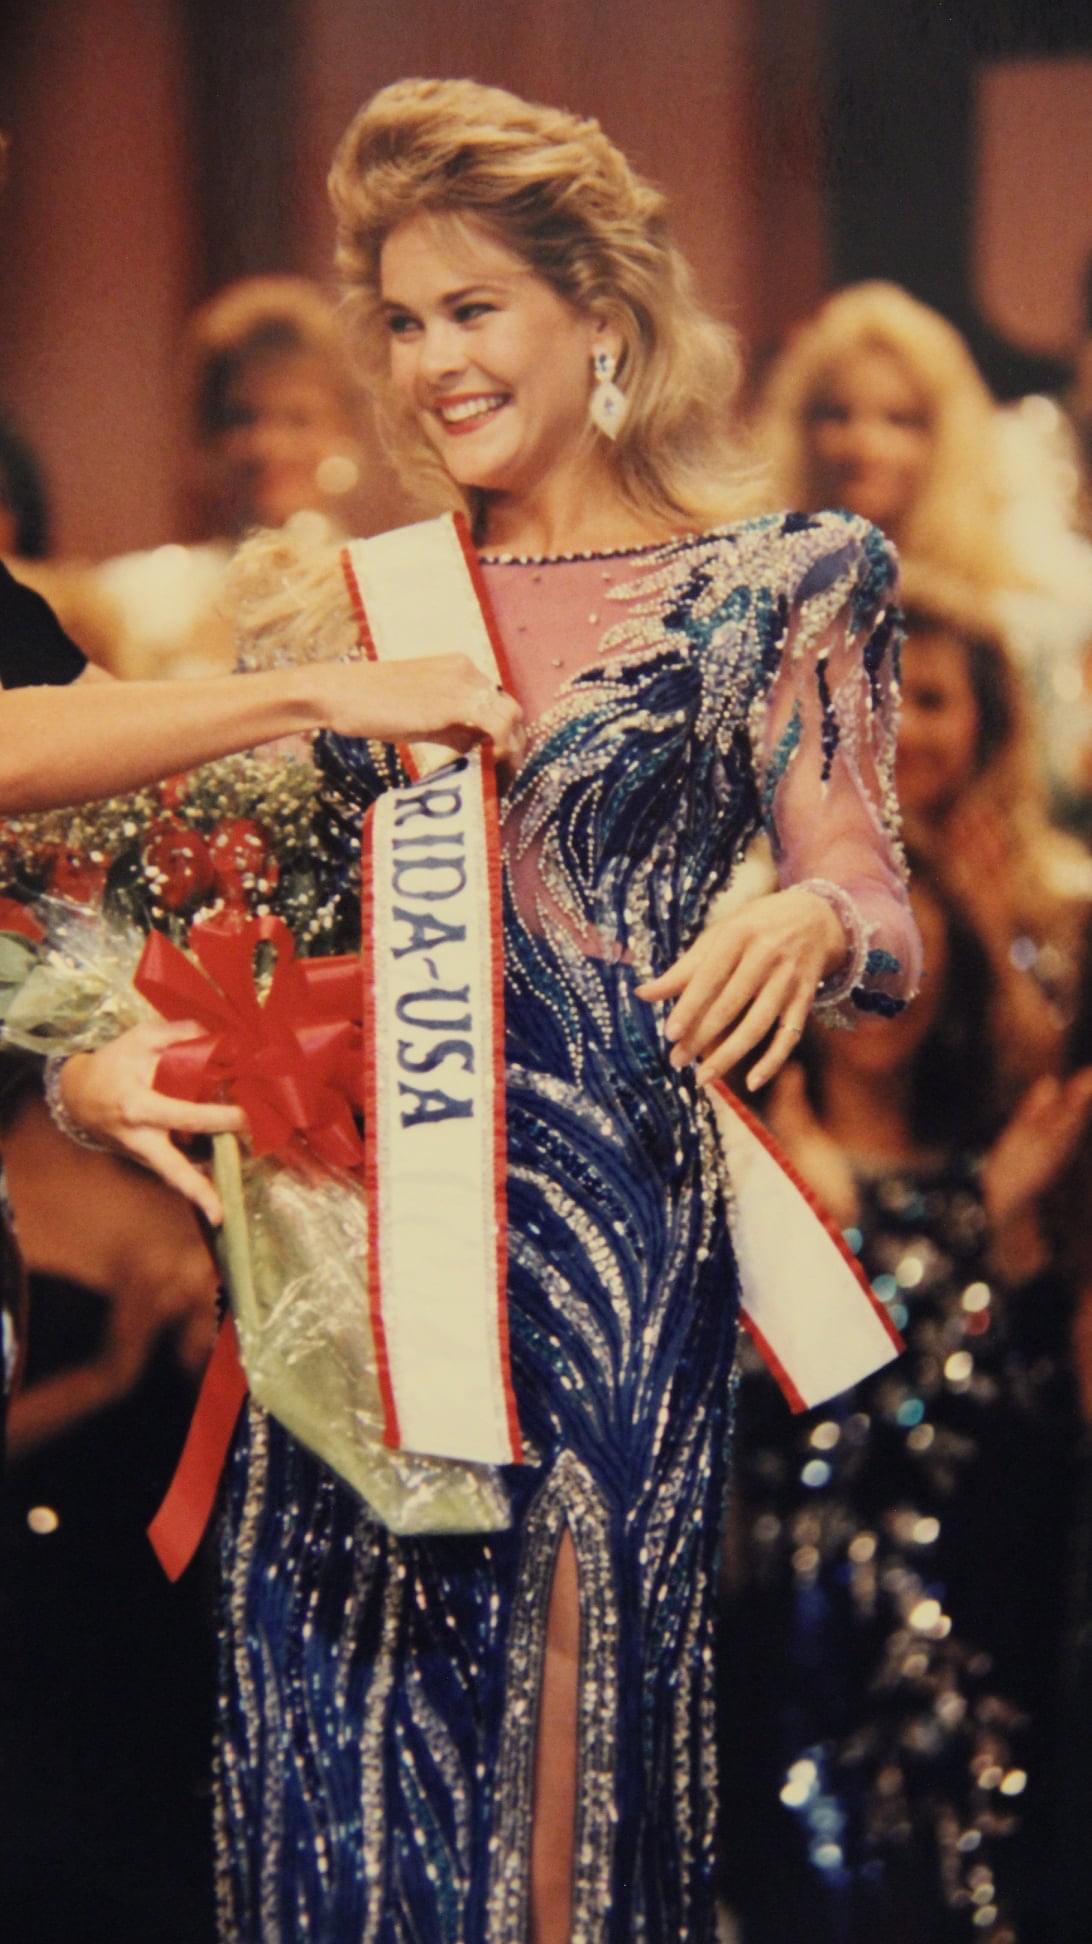 Miss-Florida-USA-1992-pageant-02